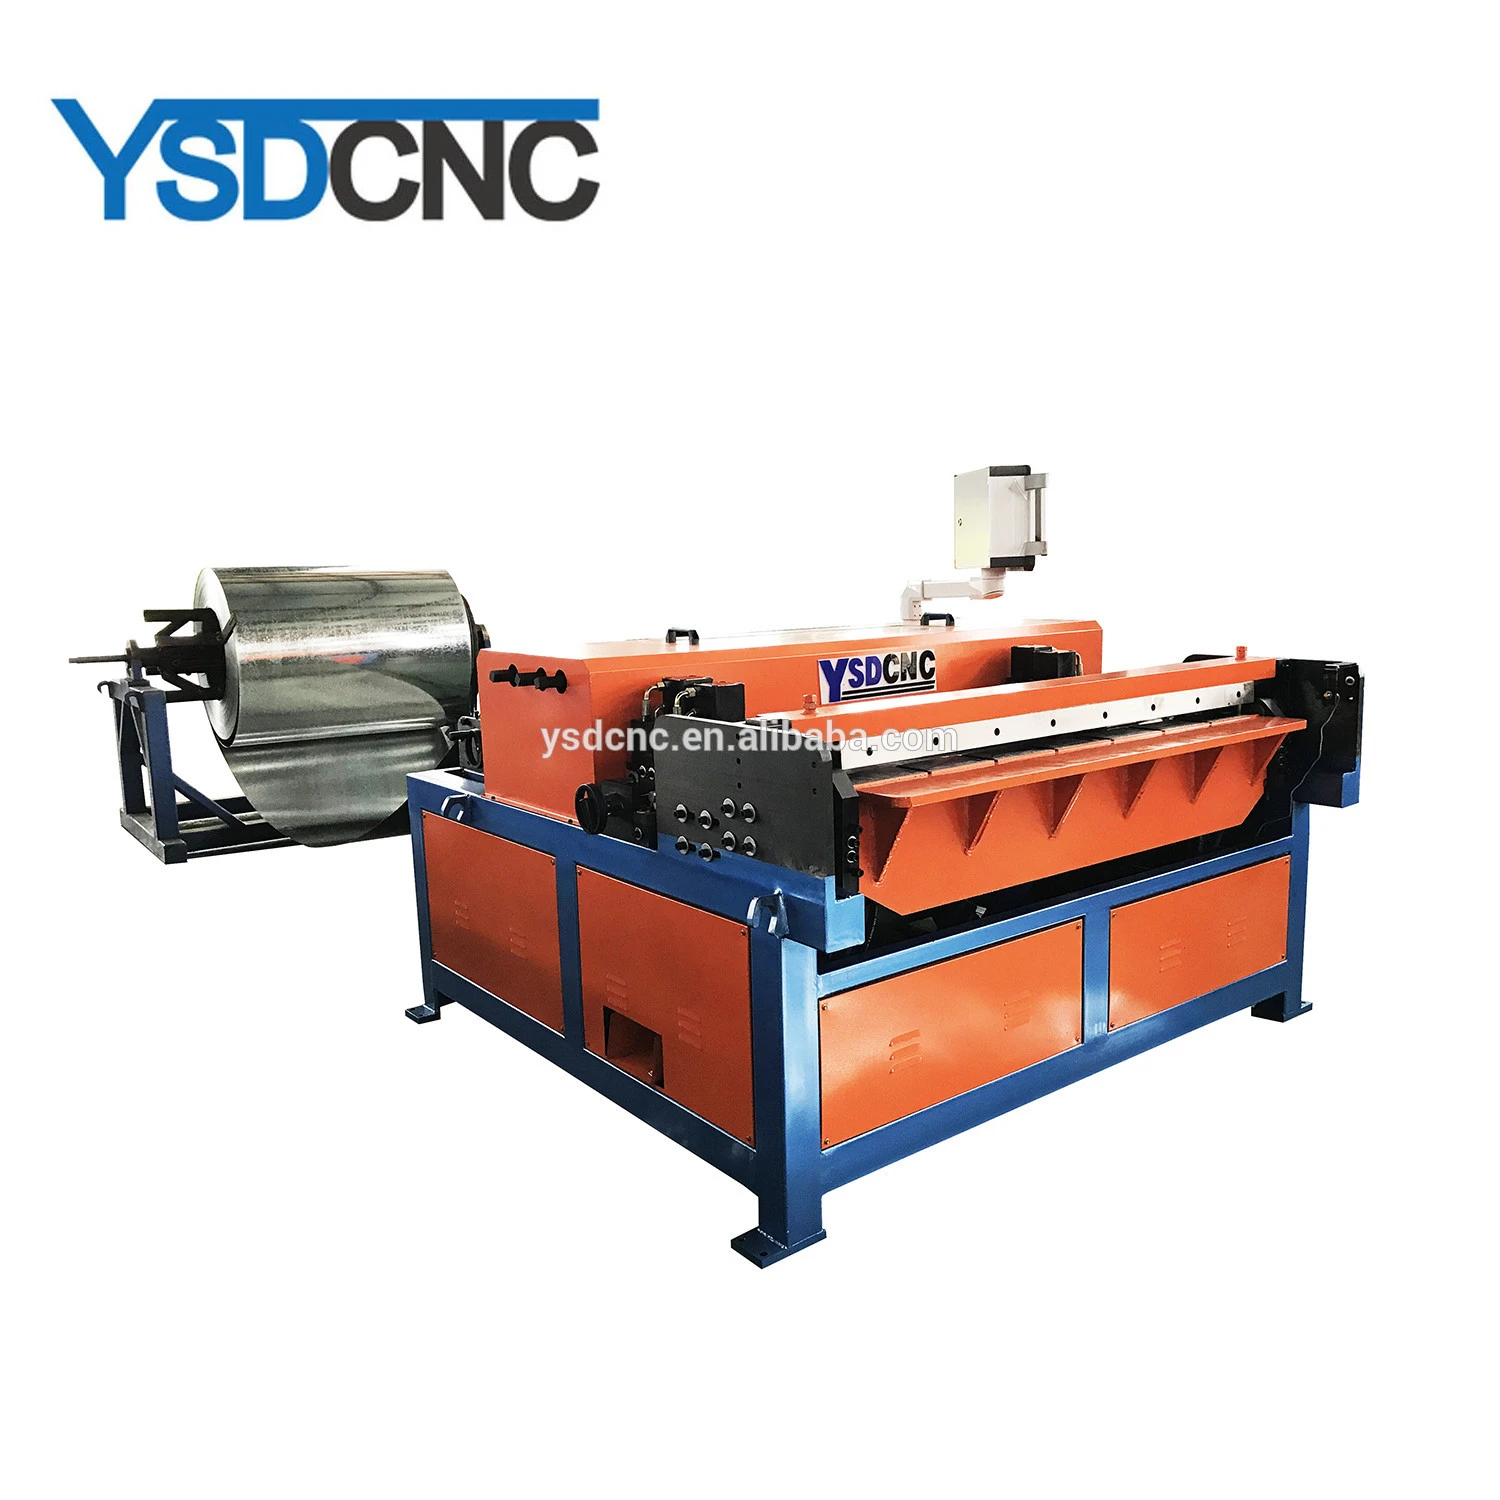 fabrication machinery hvac duct manufacturing line can automatically complete uncoiling, leveling, beading, punching, shearing